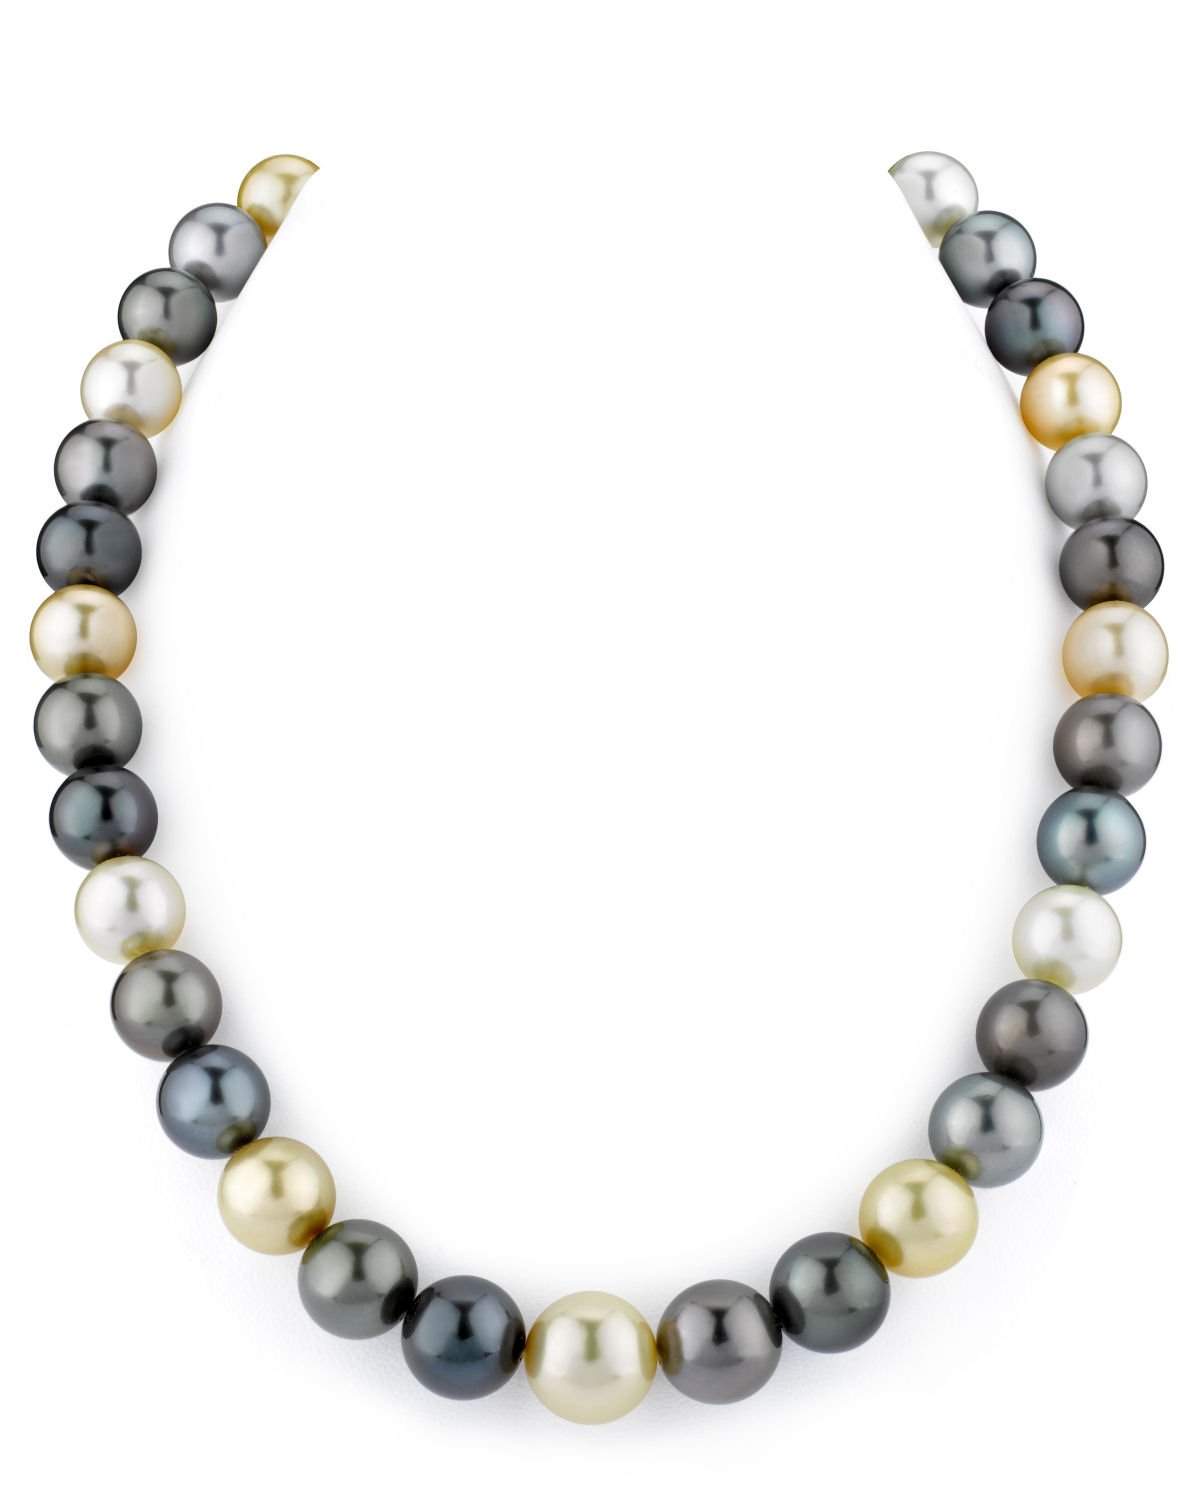 10-12mm South Sea Multicolor Pearl Necklace - AAAA Quality